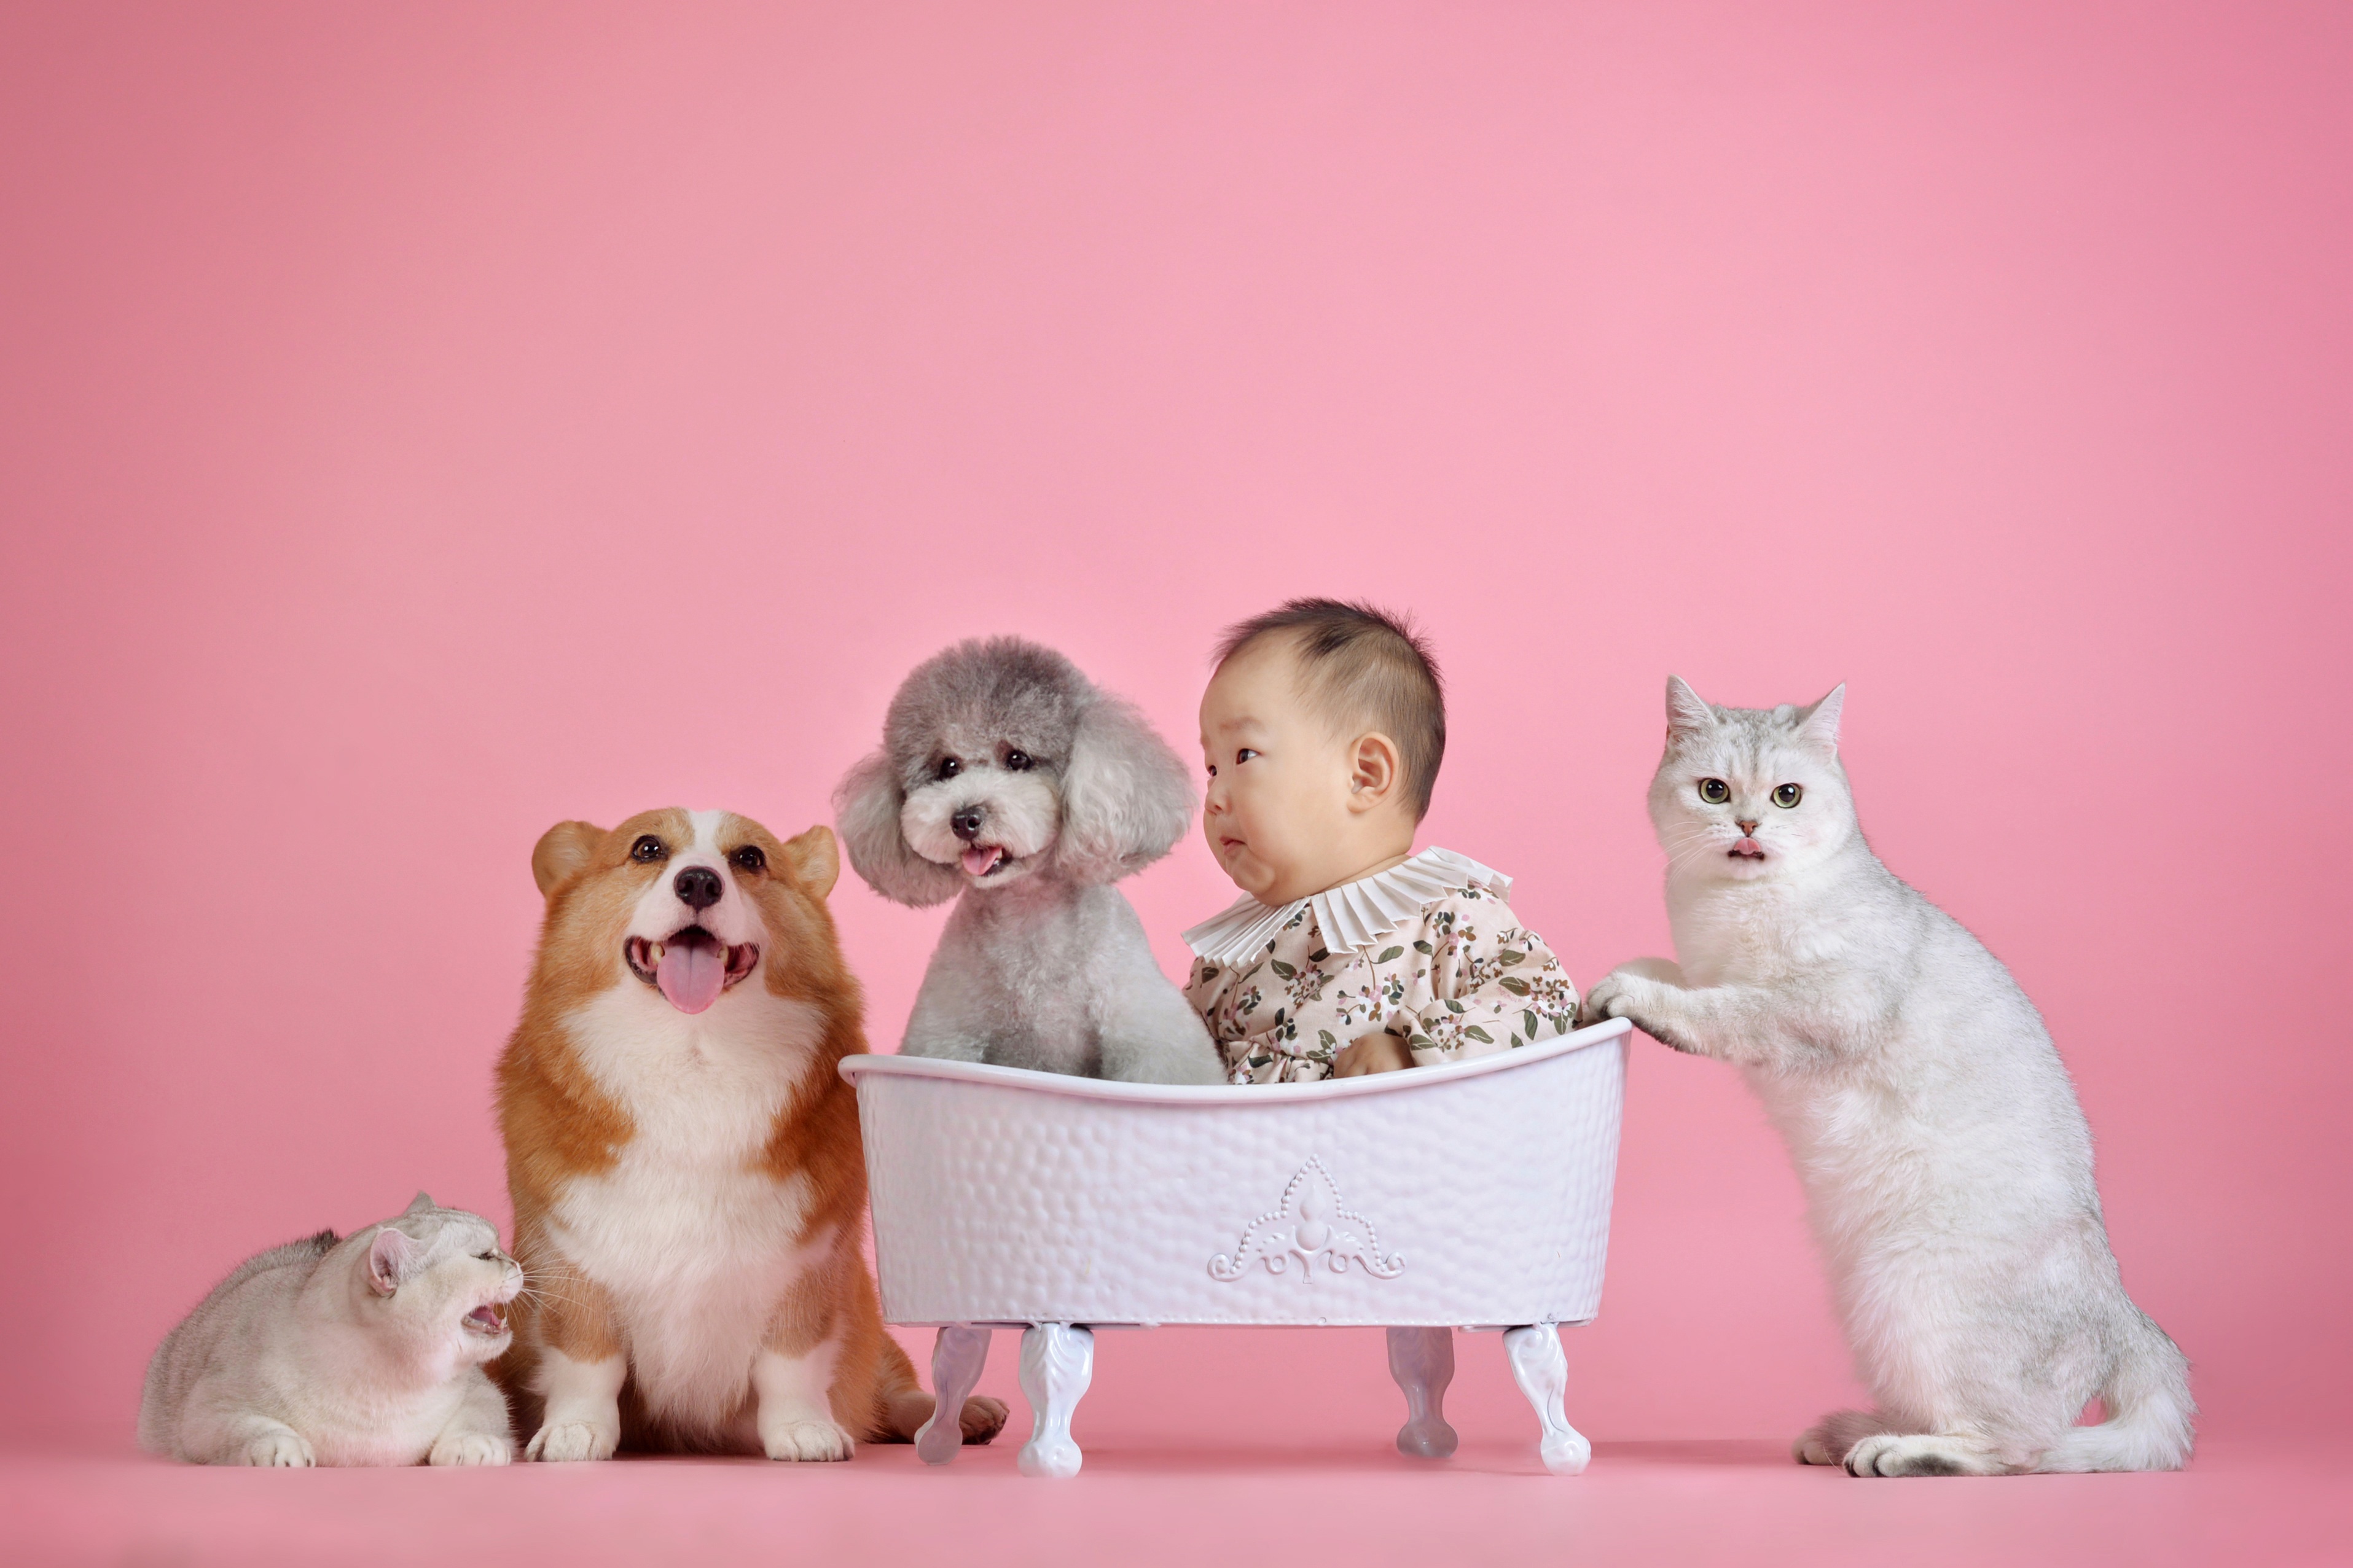 Image Poodle newborn Cats Dogs Pink background child Asian 3830x2553